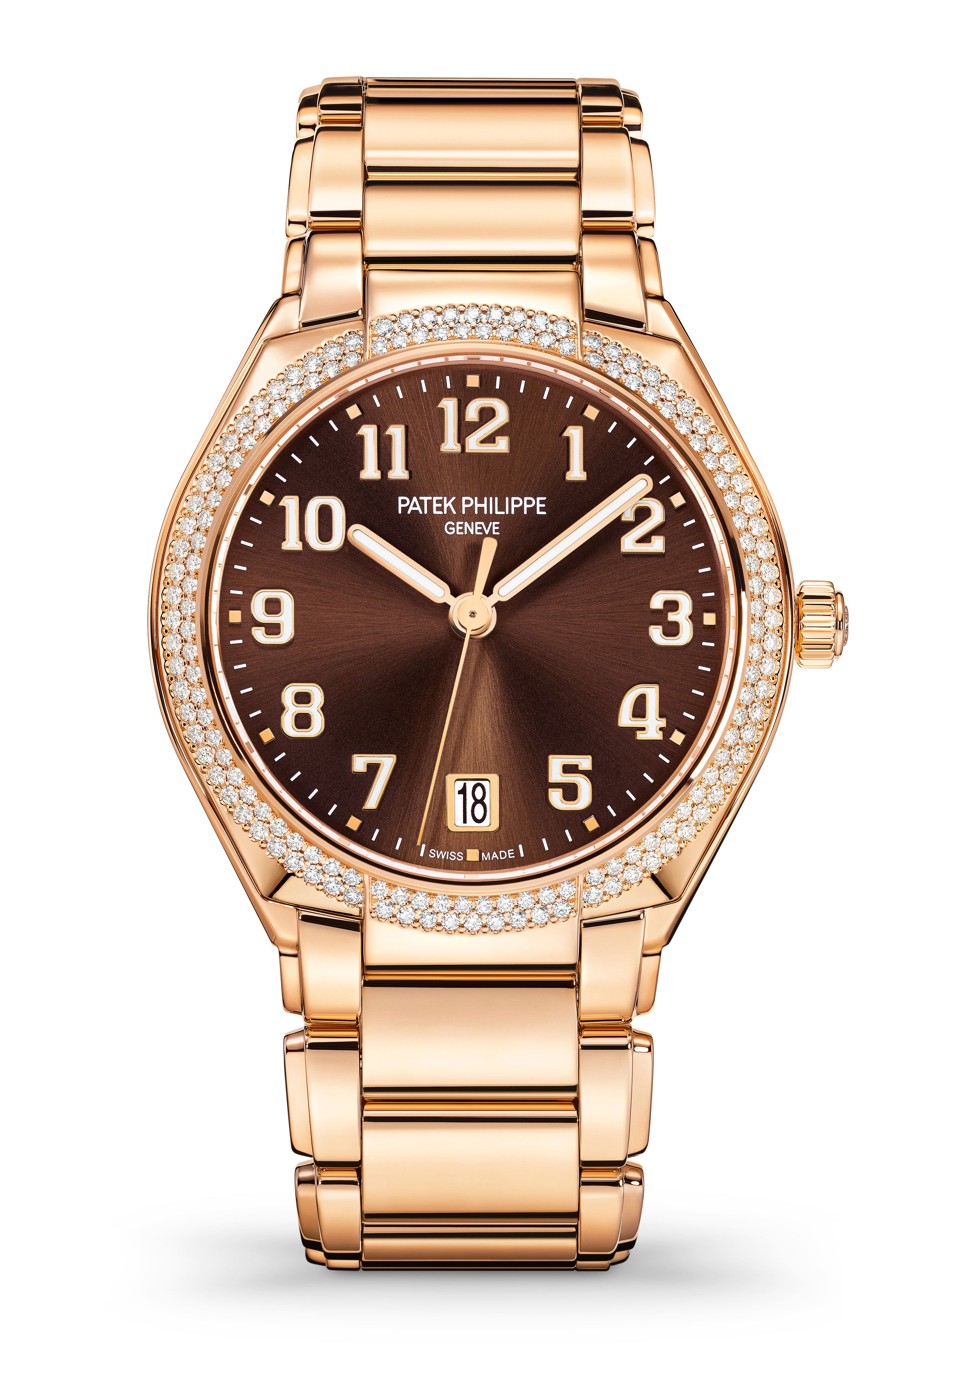 STYLE Edit: Why did Patek Philippe need 5 years to create a new watch ...